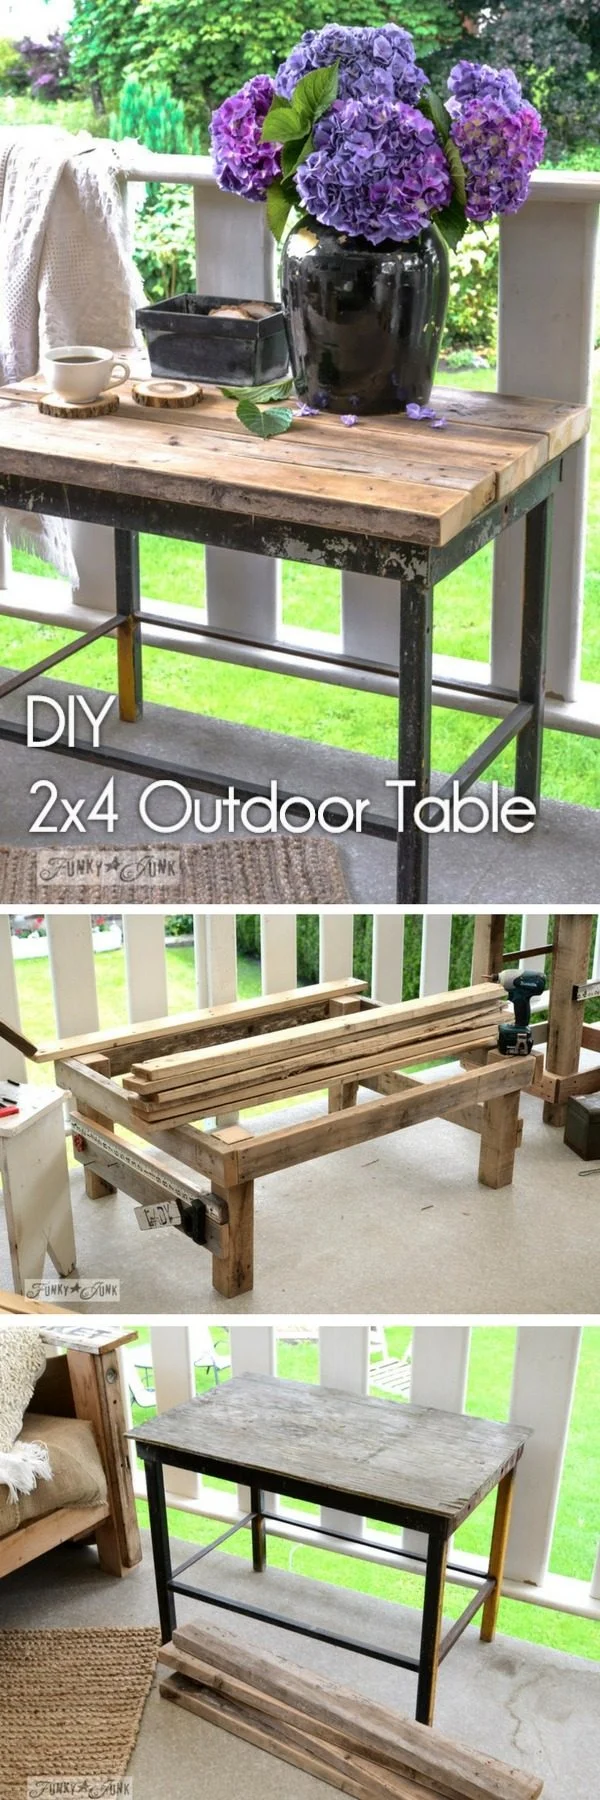 20 Crafty 2x4 DIY Projects That You Can Easily Make - Check out how to make a   outdoor table from 2x4s 